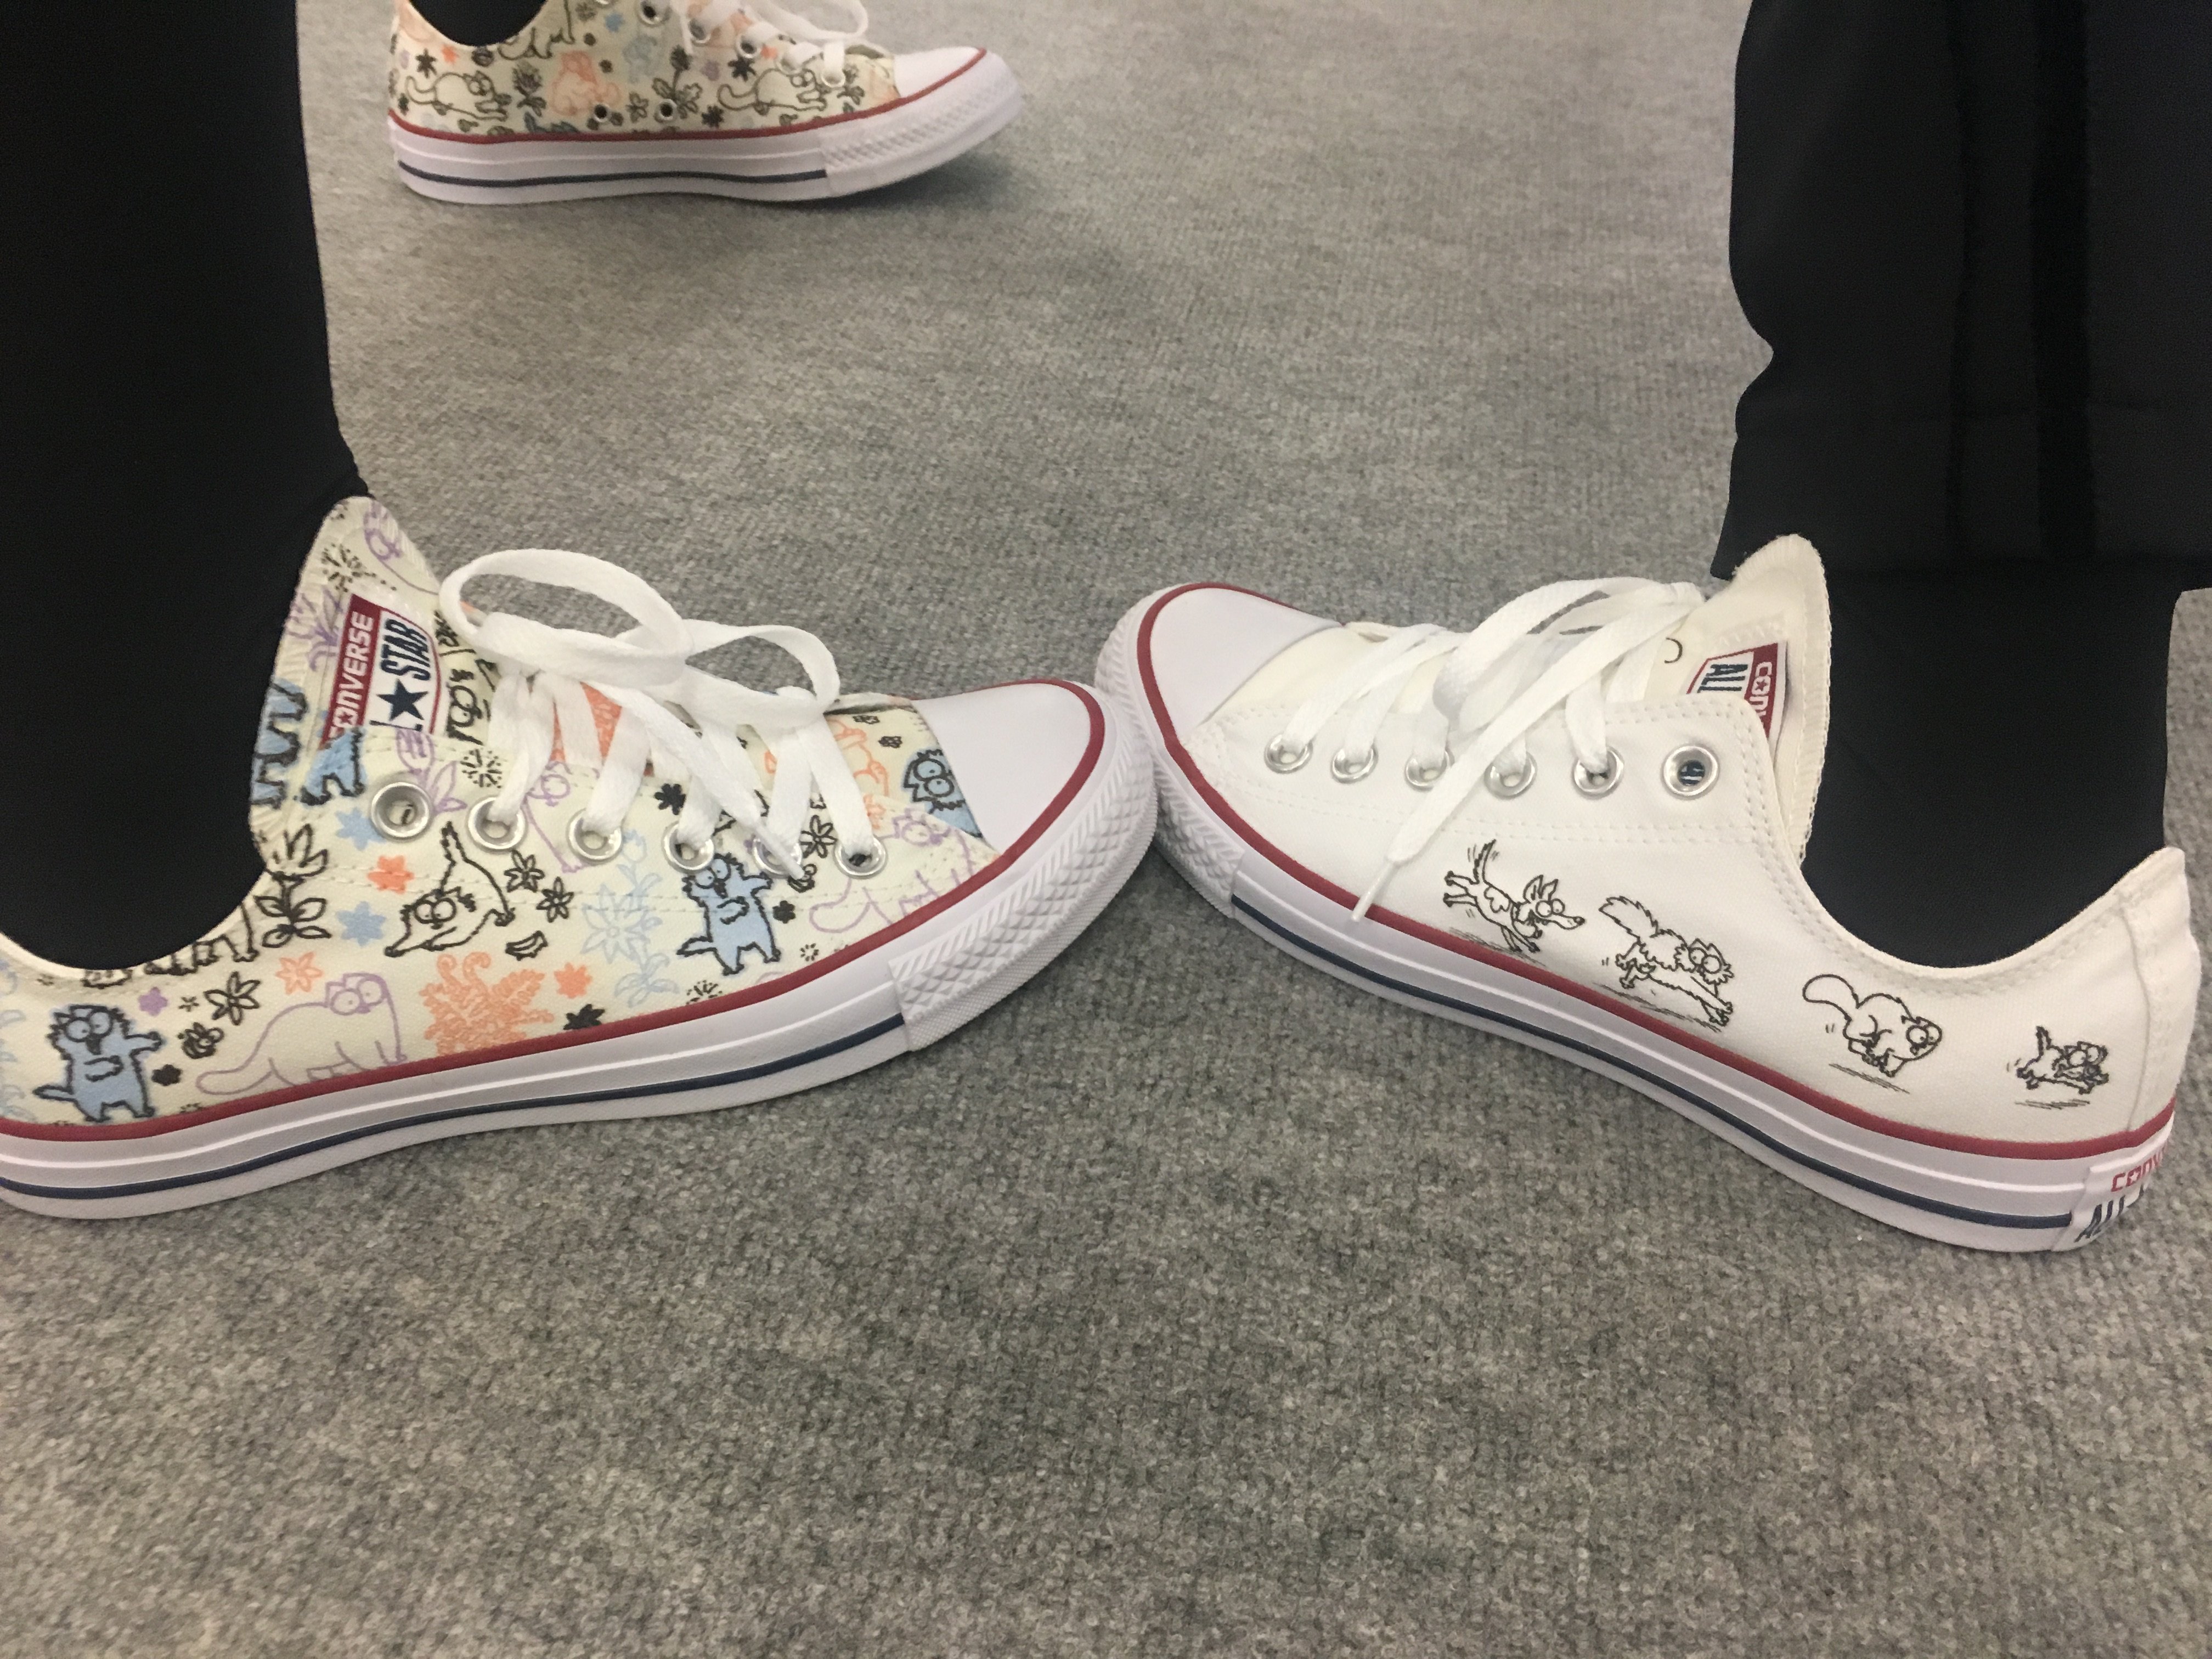 Articulation Business description intellectual Simon's Cat on Twitter: "Great NEWS! The Simon's Cat &amp; CONVERSE  collaboration is HERE: https://t.co/BONOA6kSA8 👟😺😍 What's your favorite  design? https://t.co/0yma8HxhGh" / Twitter